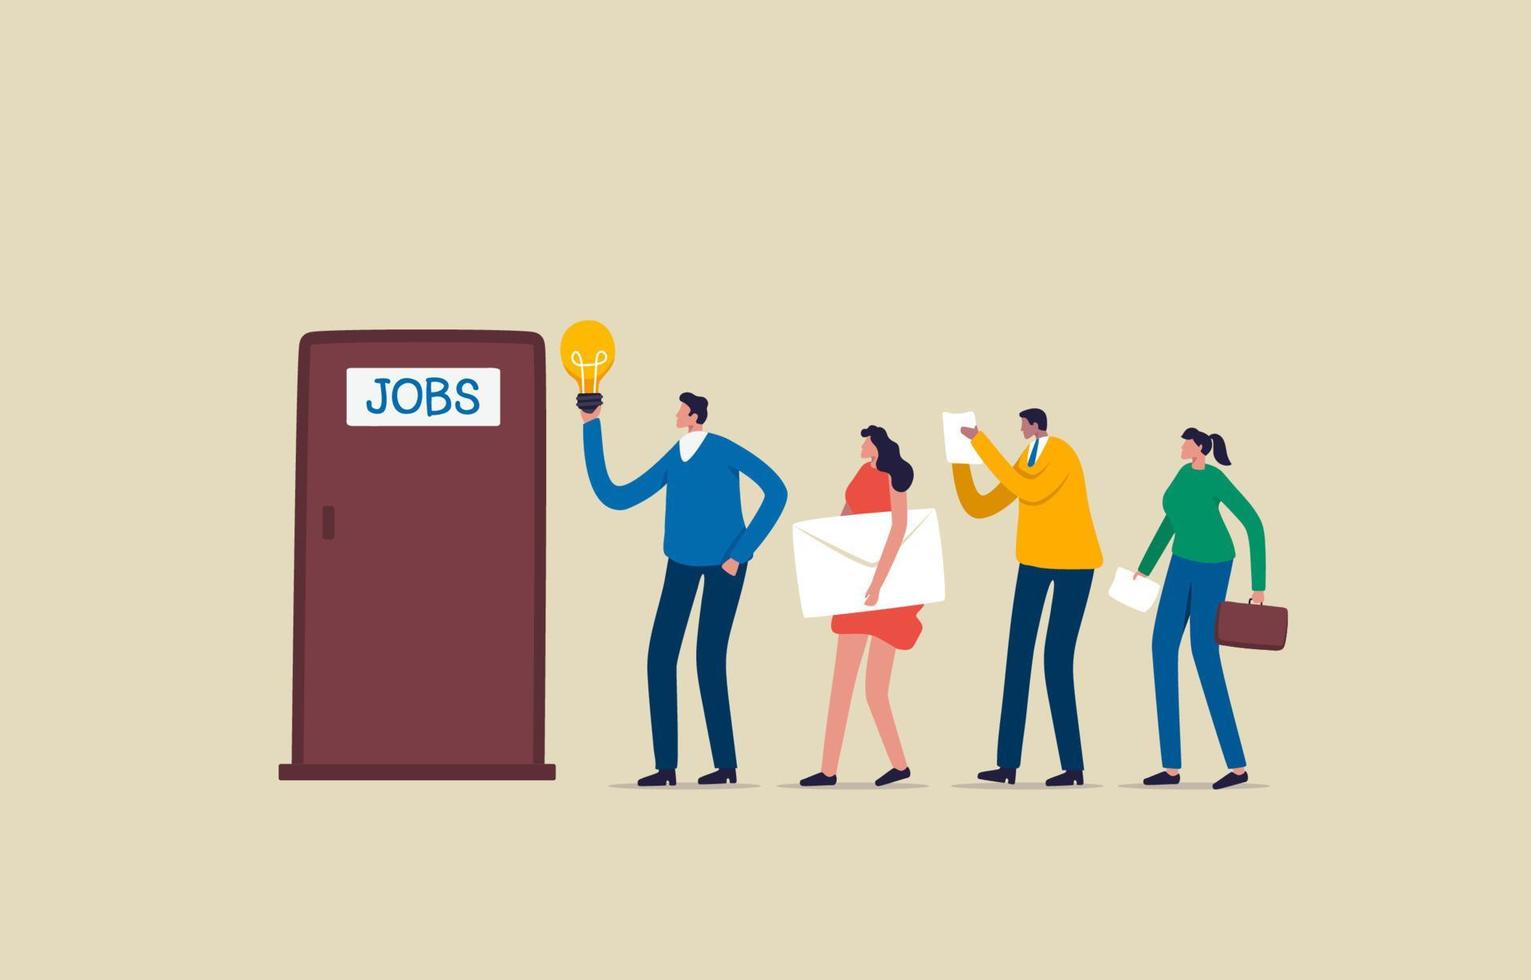 Choosing talent for job vacancy or company. Job interview candidates waiting outside room. Illustration vector